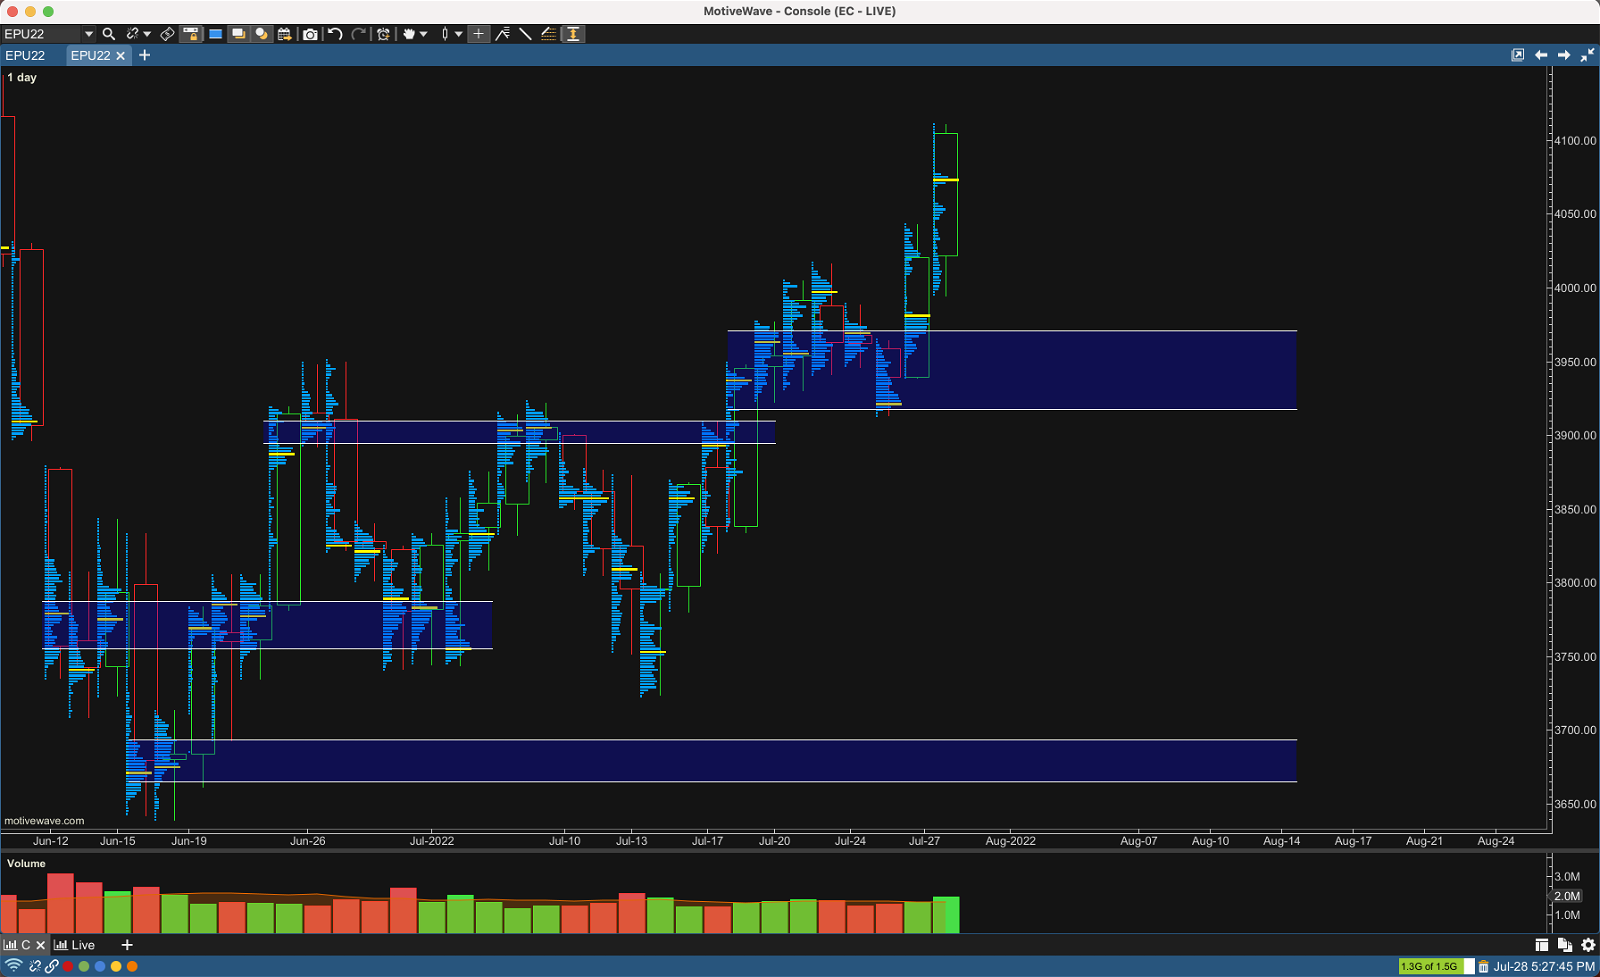 Daily Chart of eMini S&P 500 Project Support and Resistance Levels from HVN's